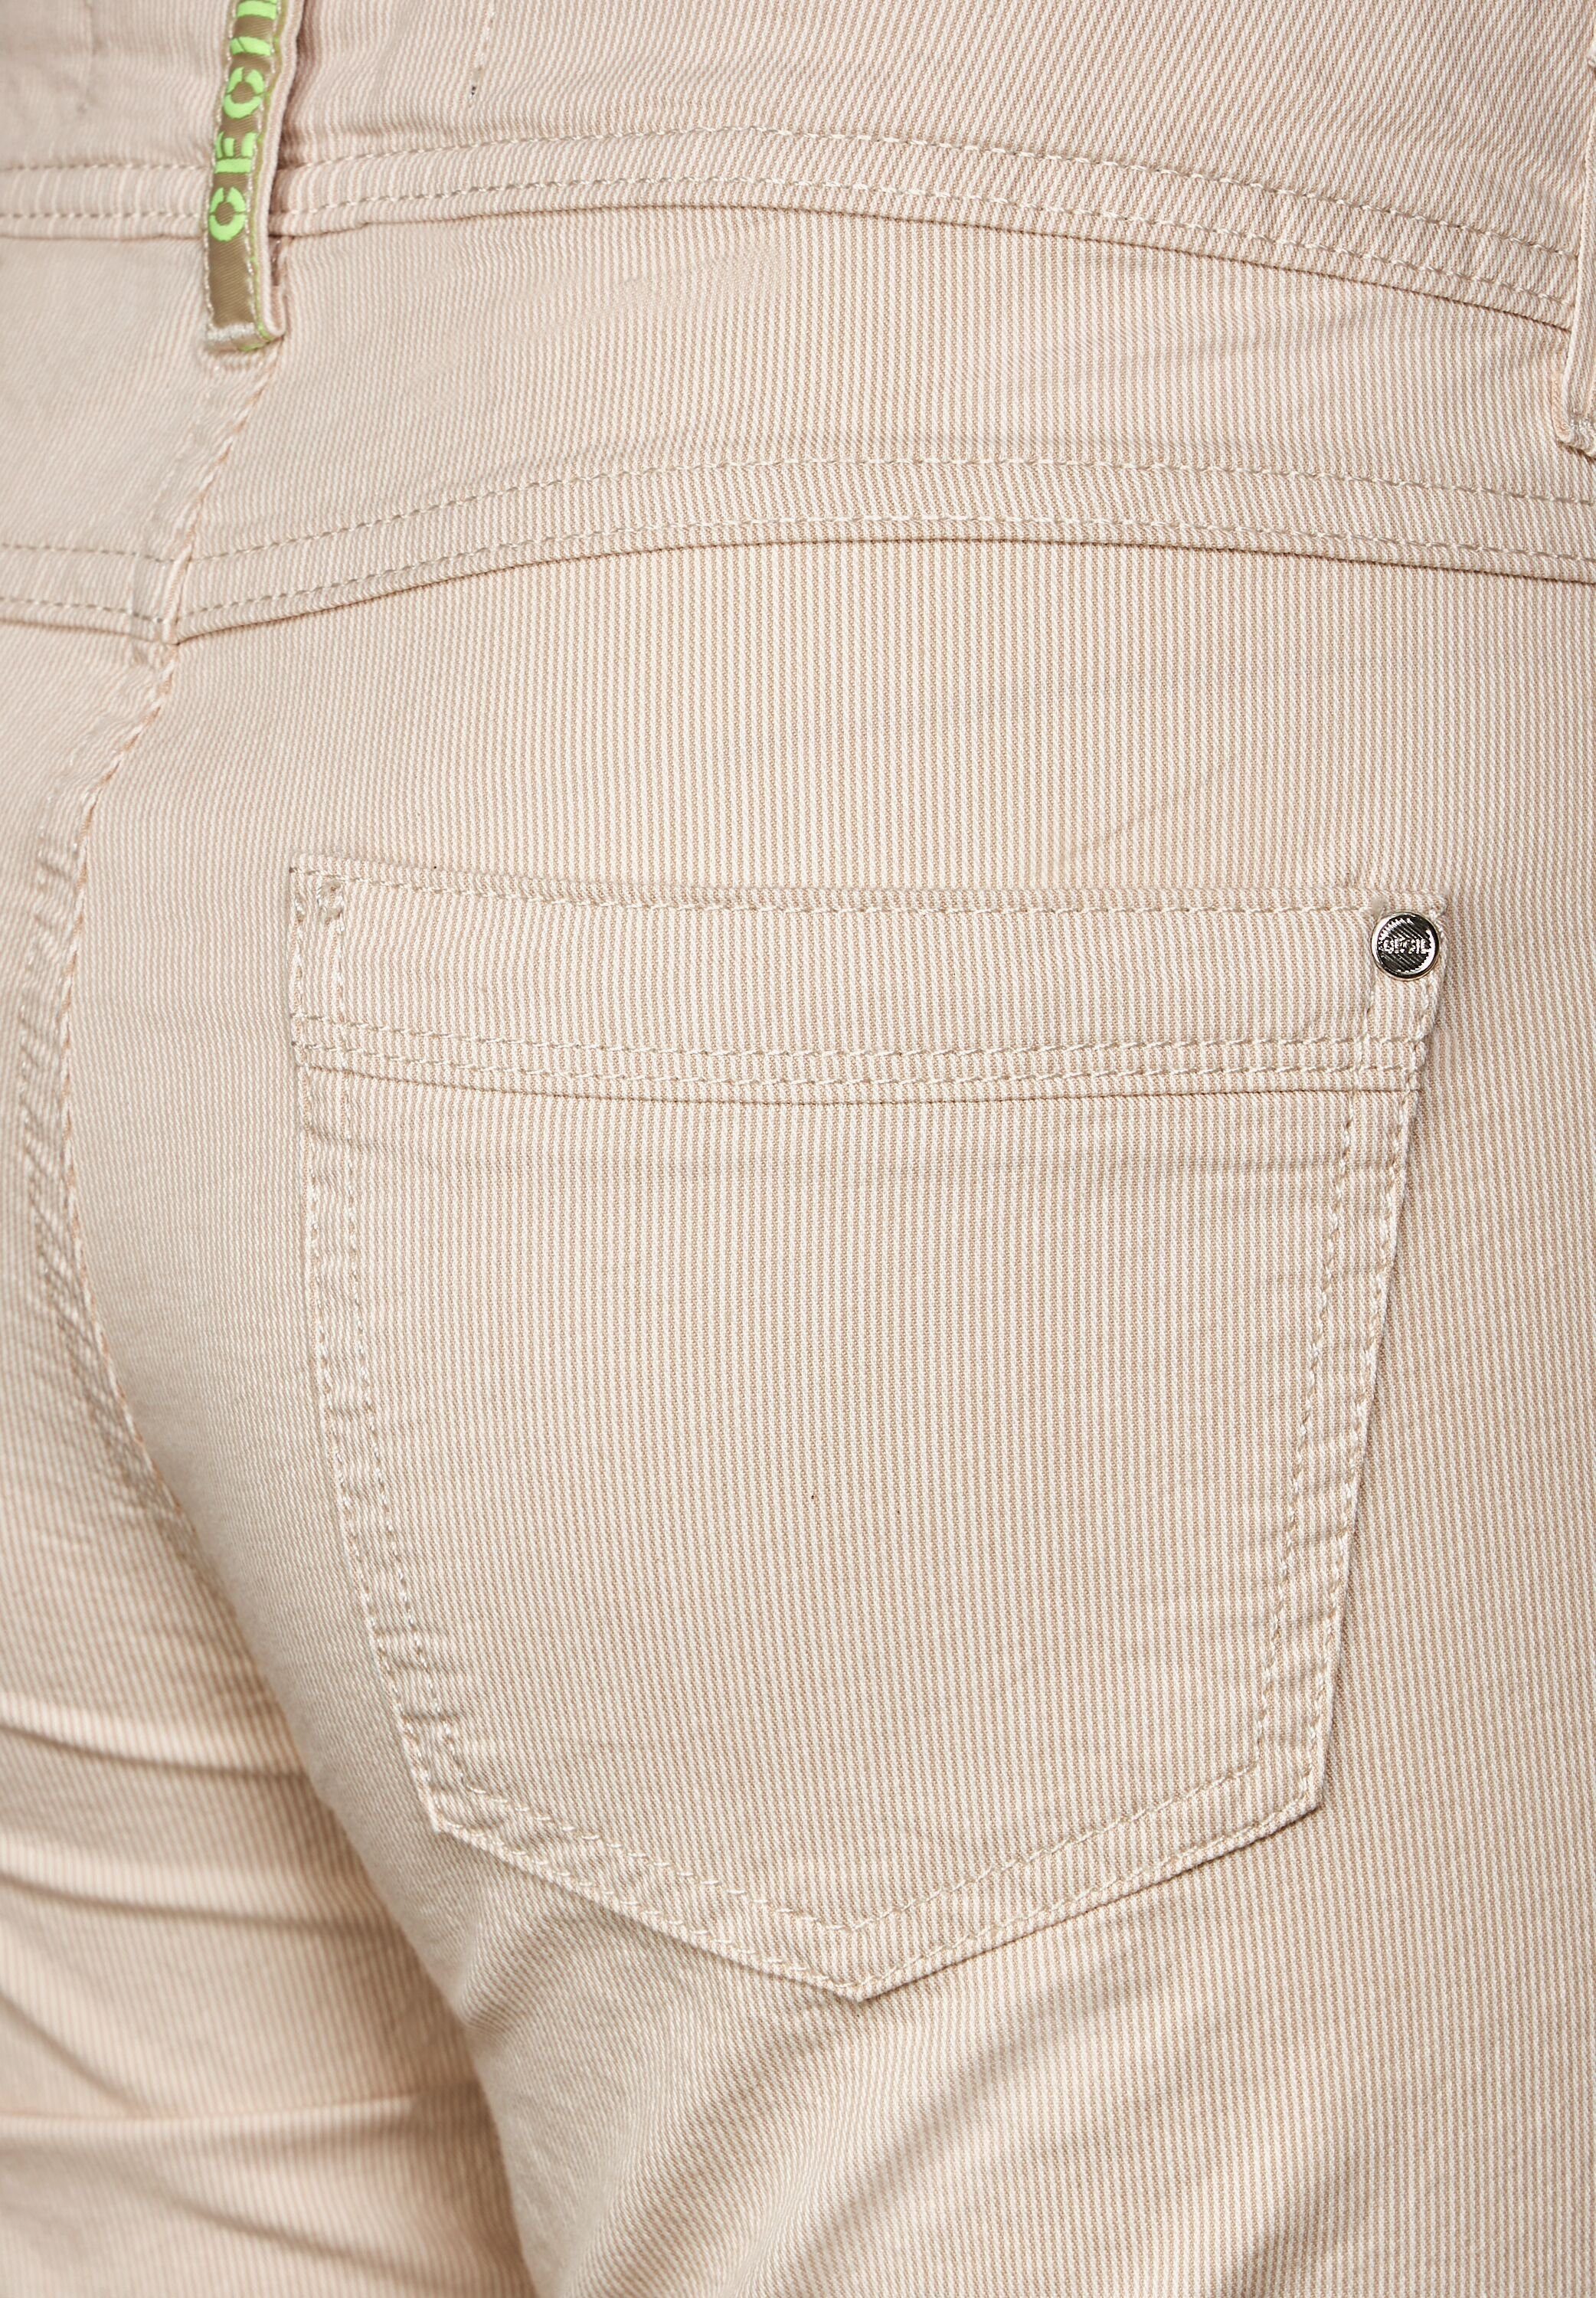 Style Cecil beige authentic 4-Pocket Stoffhose